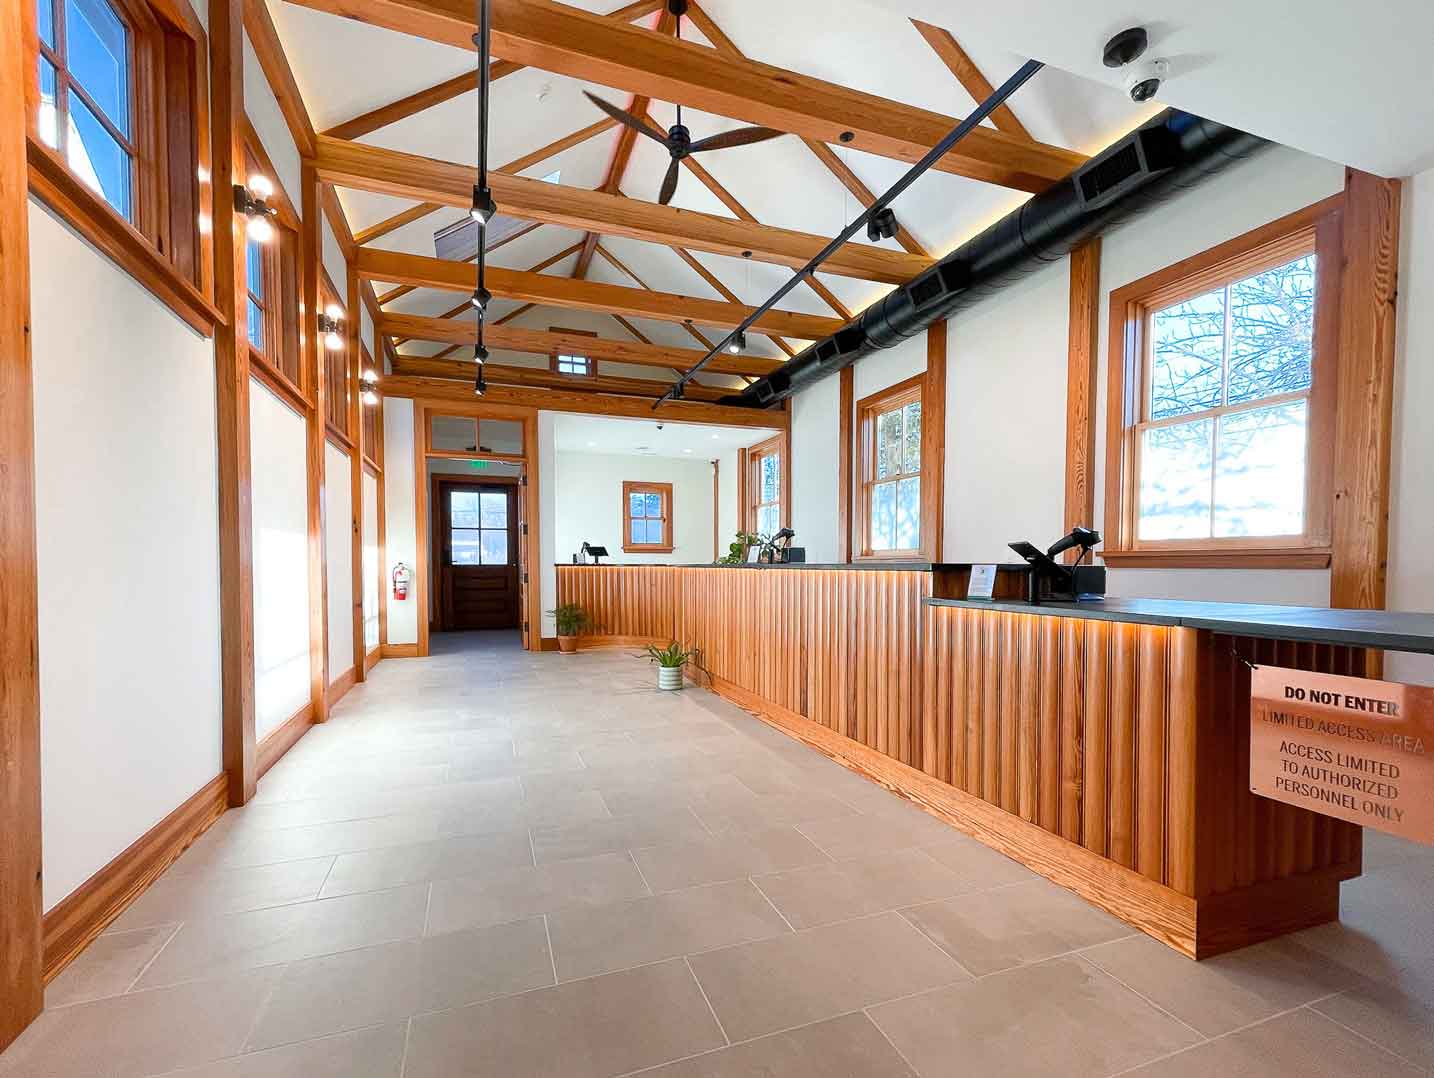 Sales Floor at Piping Plover's Wellfleet Dispensary - Photo Credit: Piping Plover